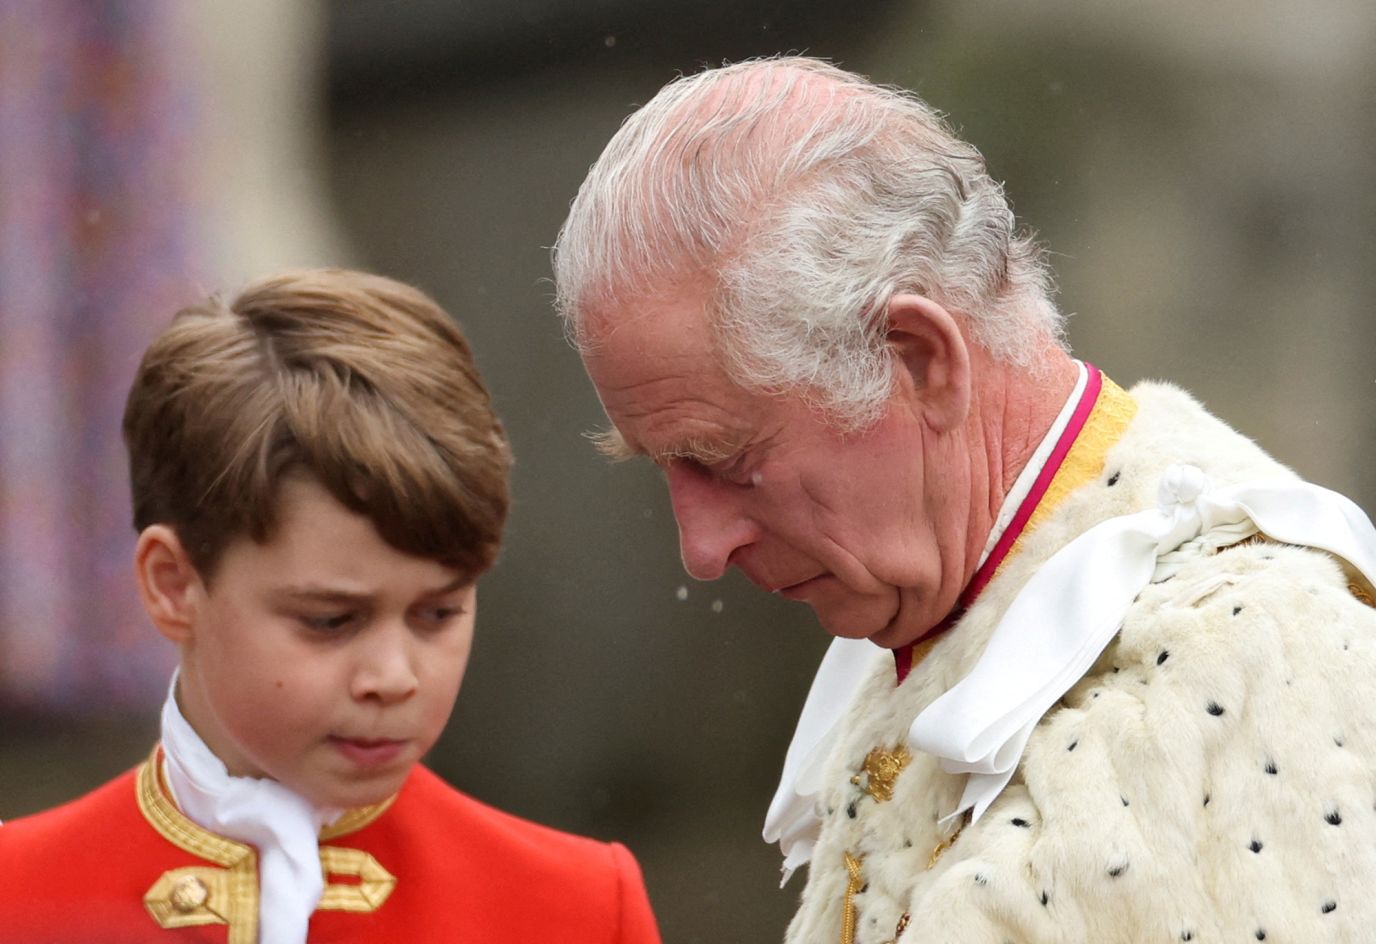 The King is seen near his grandson Prince George, one of his pages of honor.